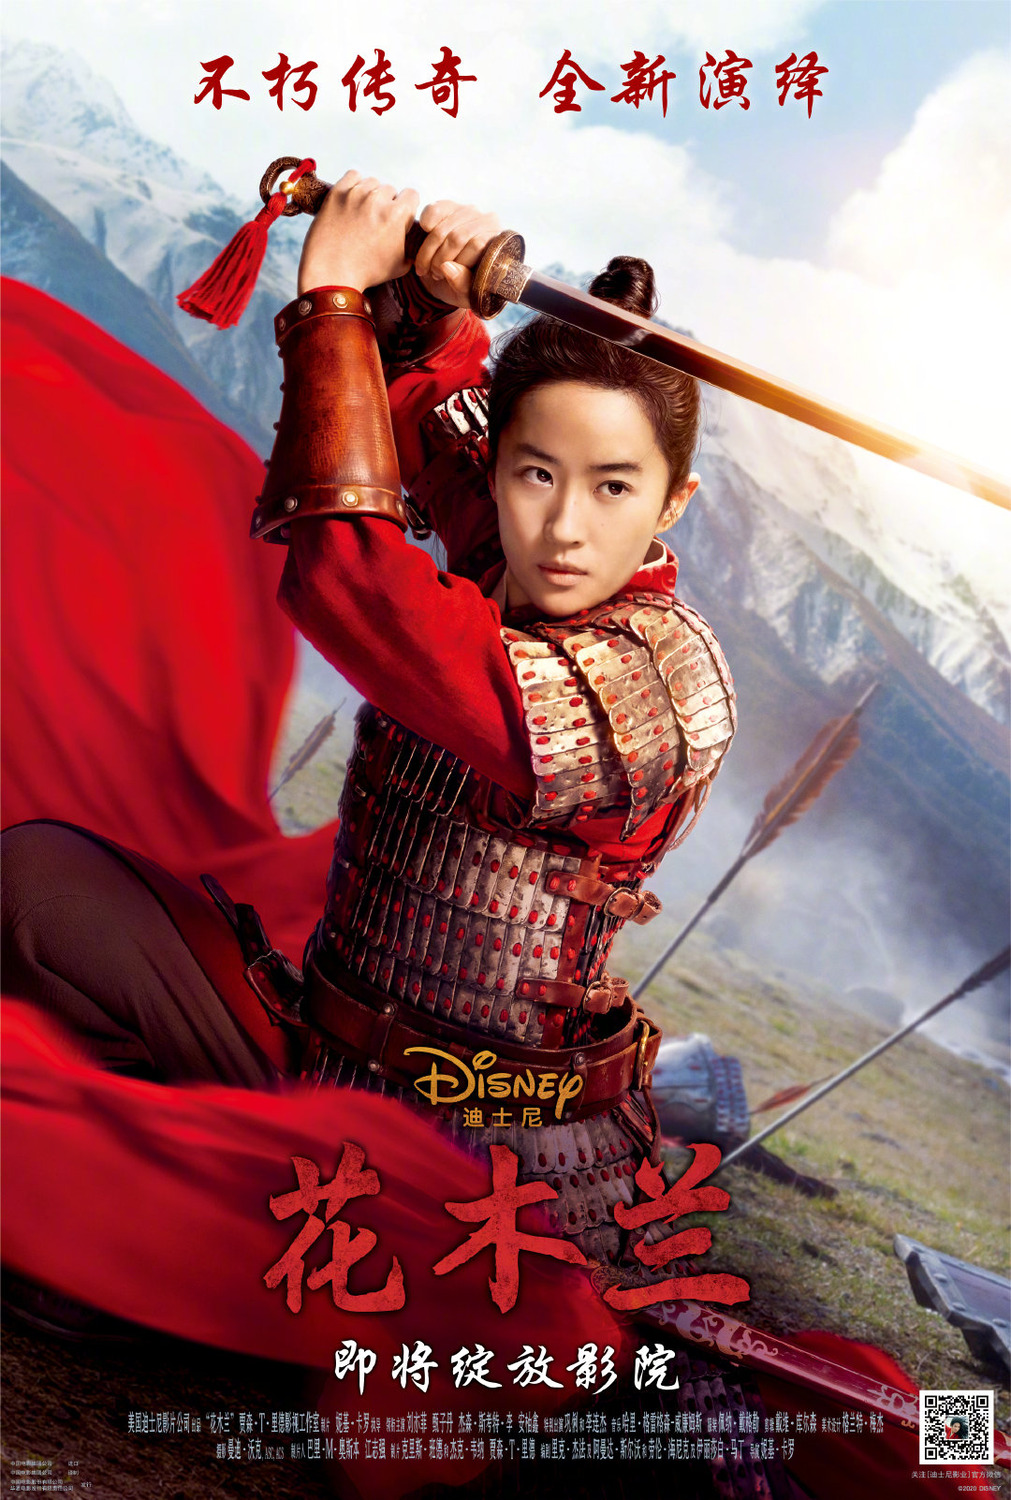 Extra Large Movie Poster Image for Mulan (#24 of 33)